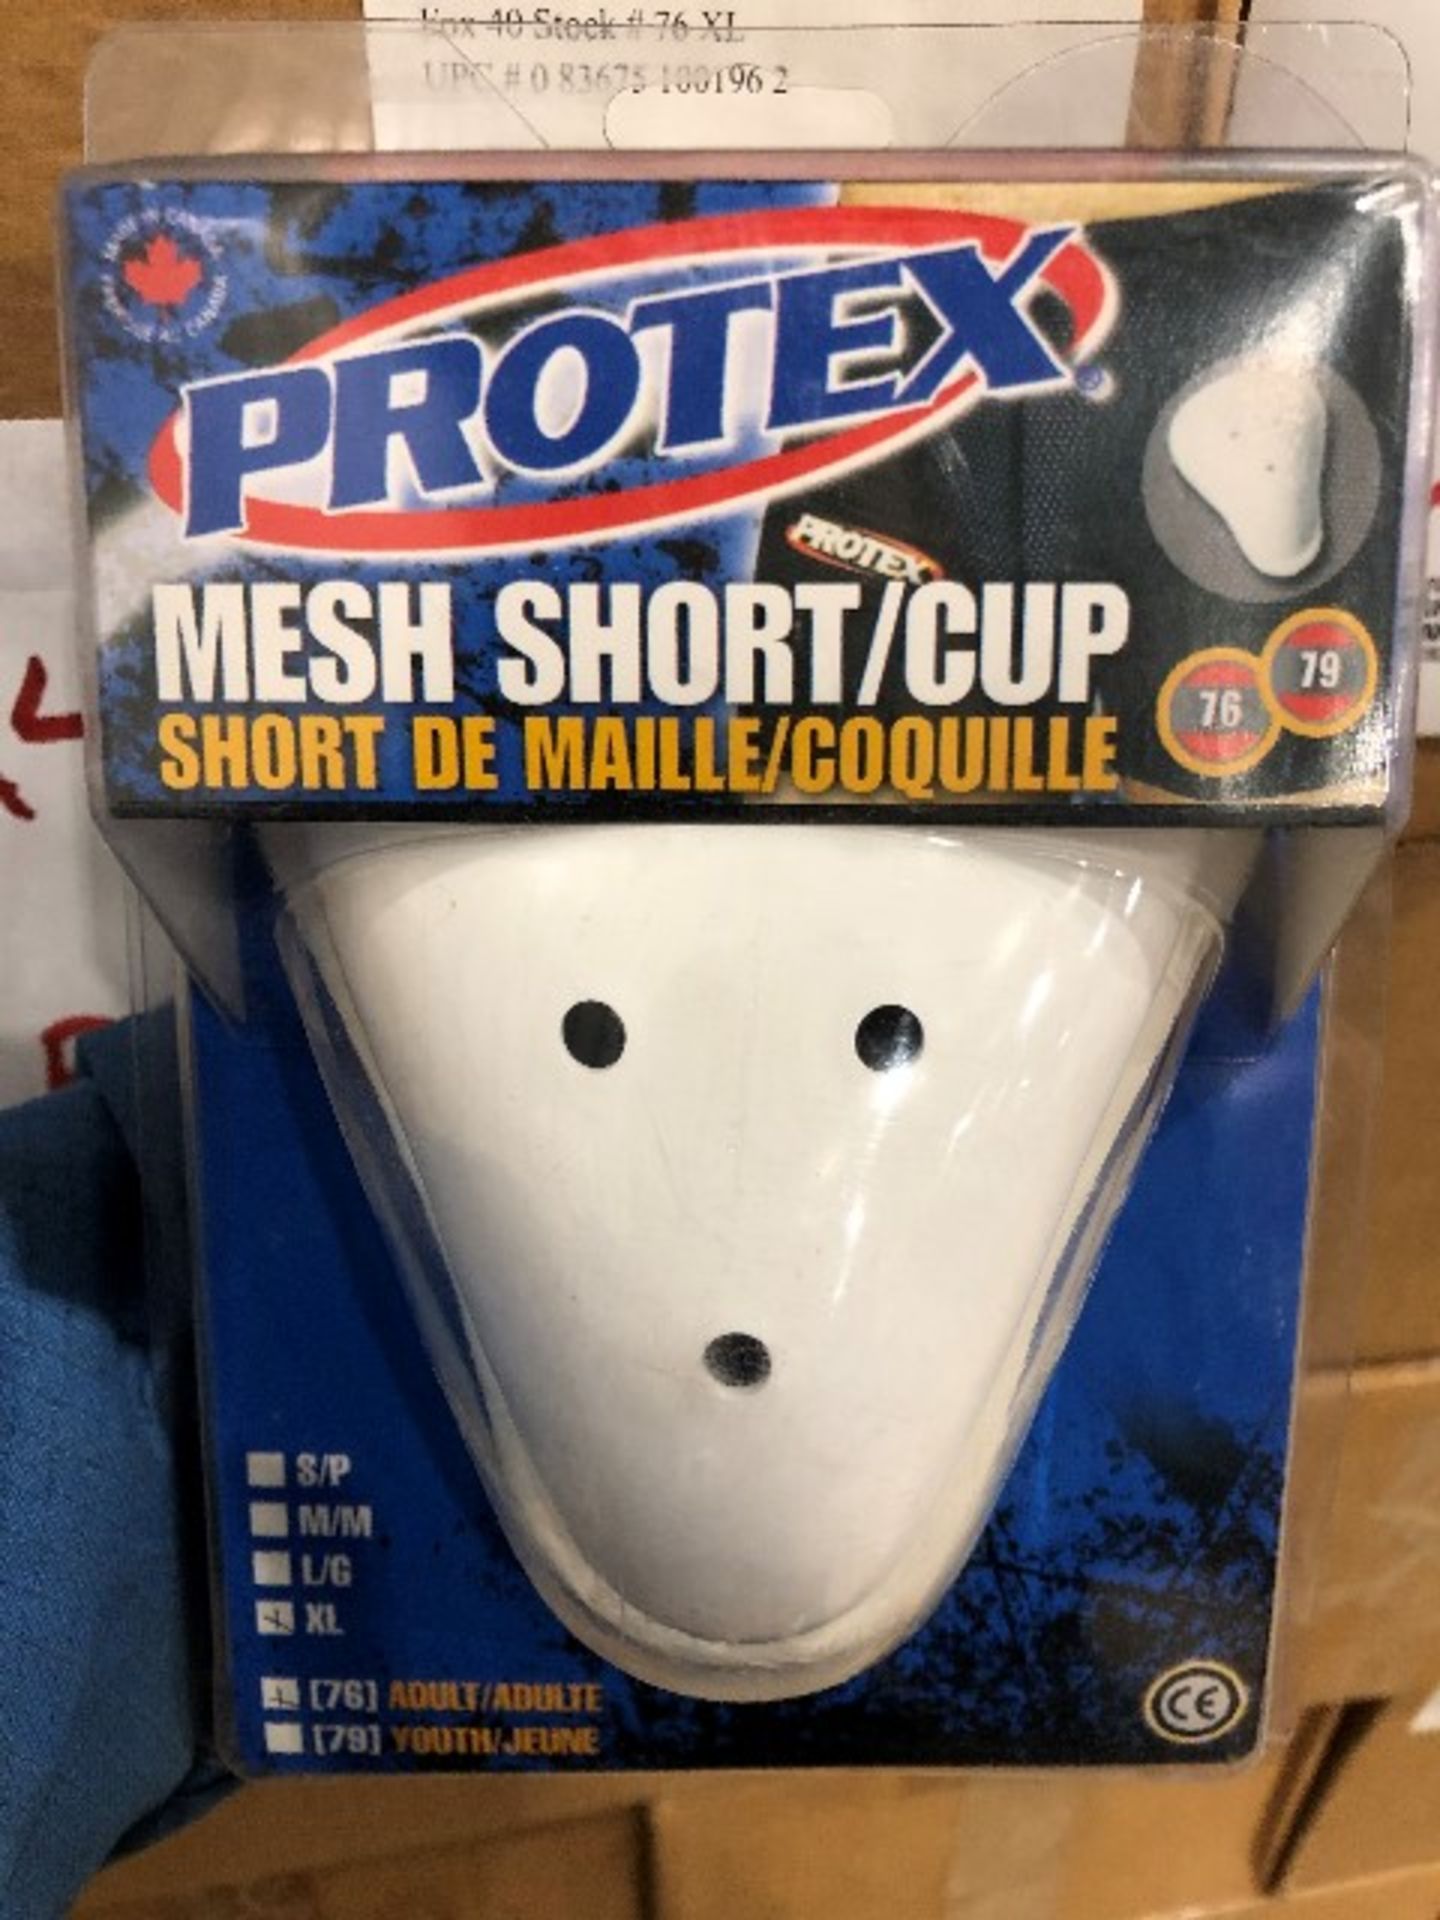 Protex mesh short/cup protector, size: male X-Large Adult, 40pcs, 10 boxes (4 per box)